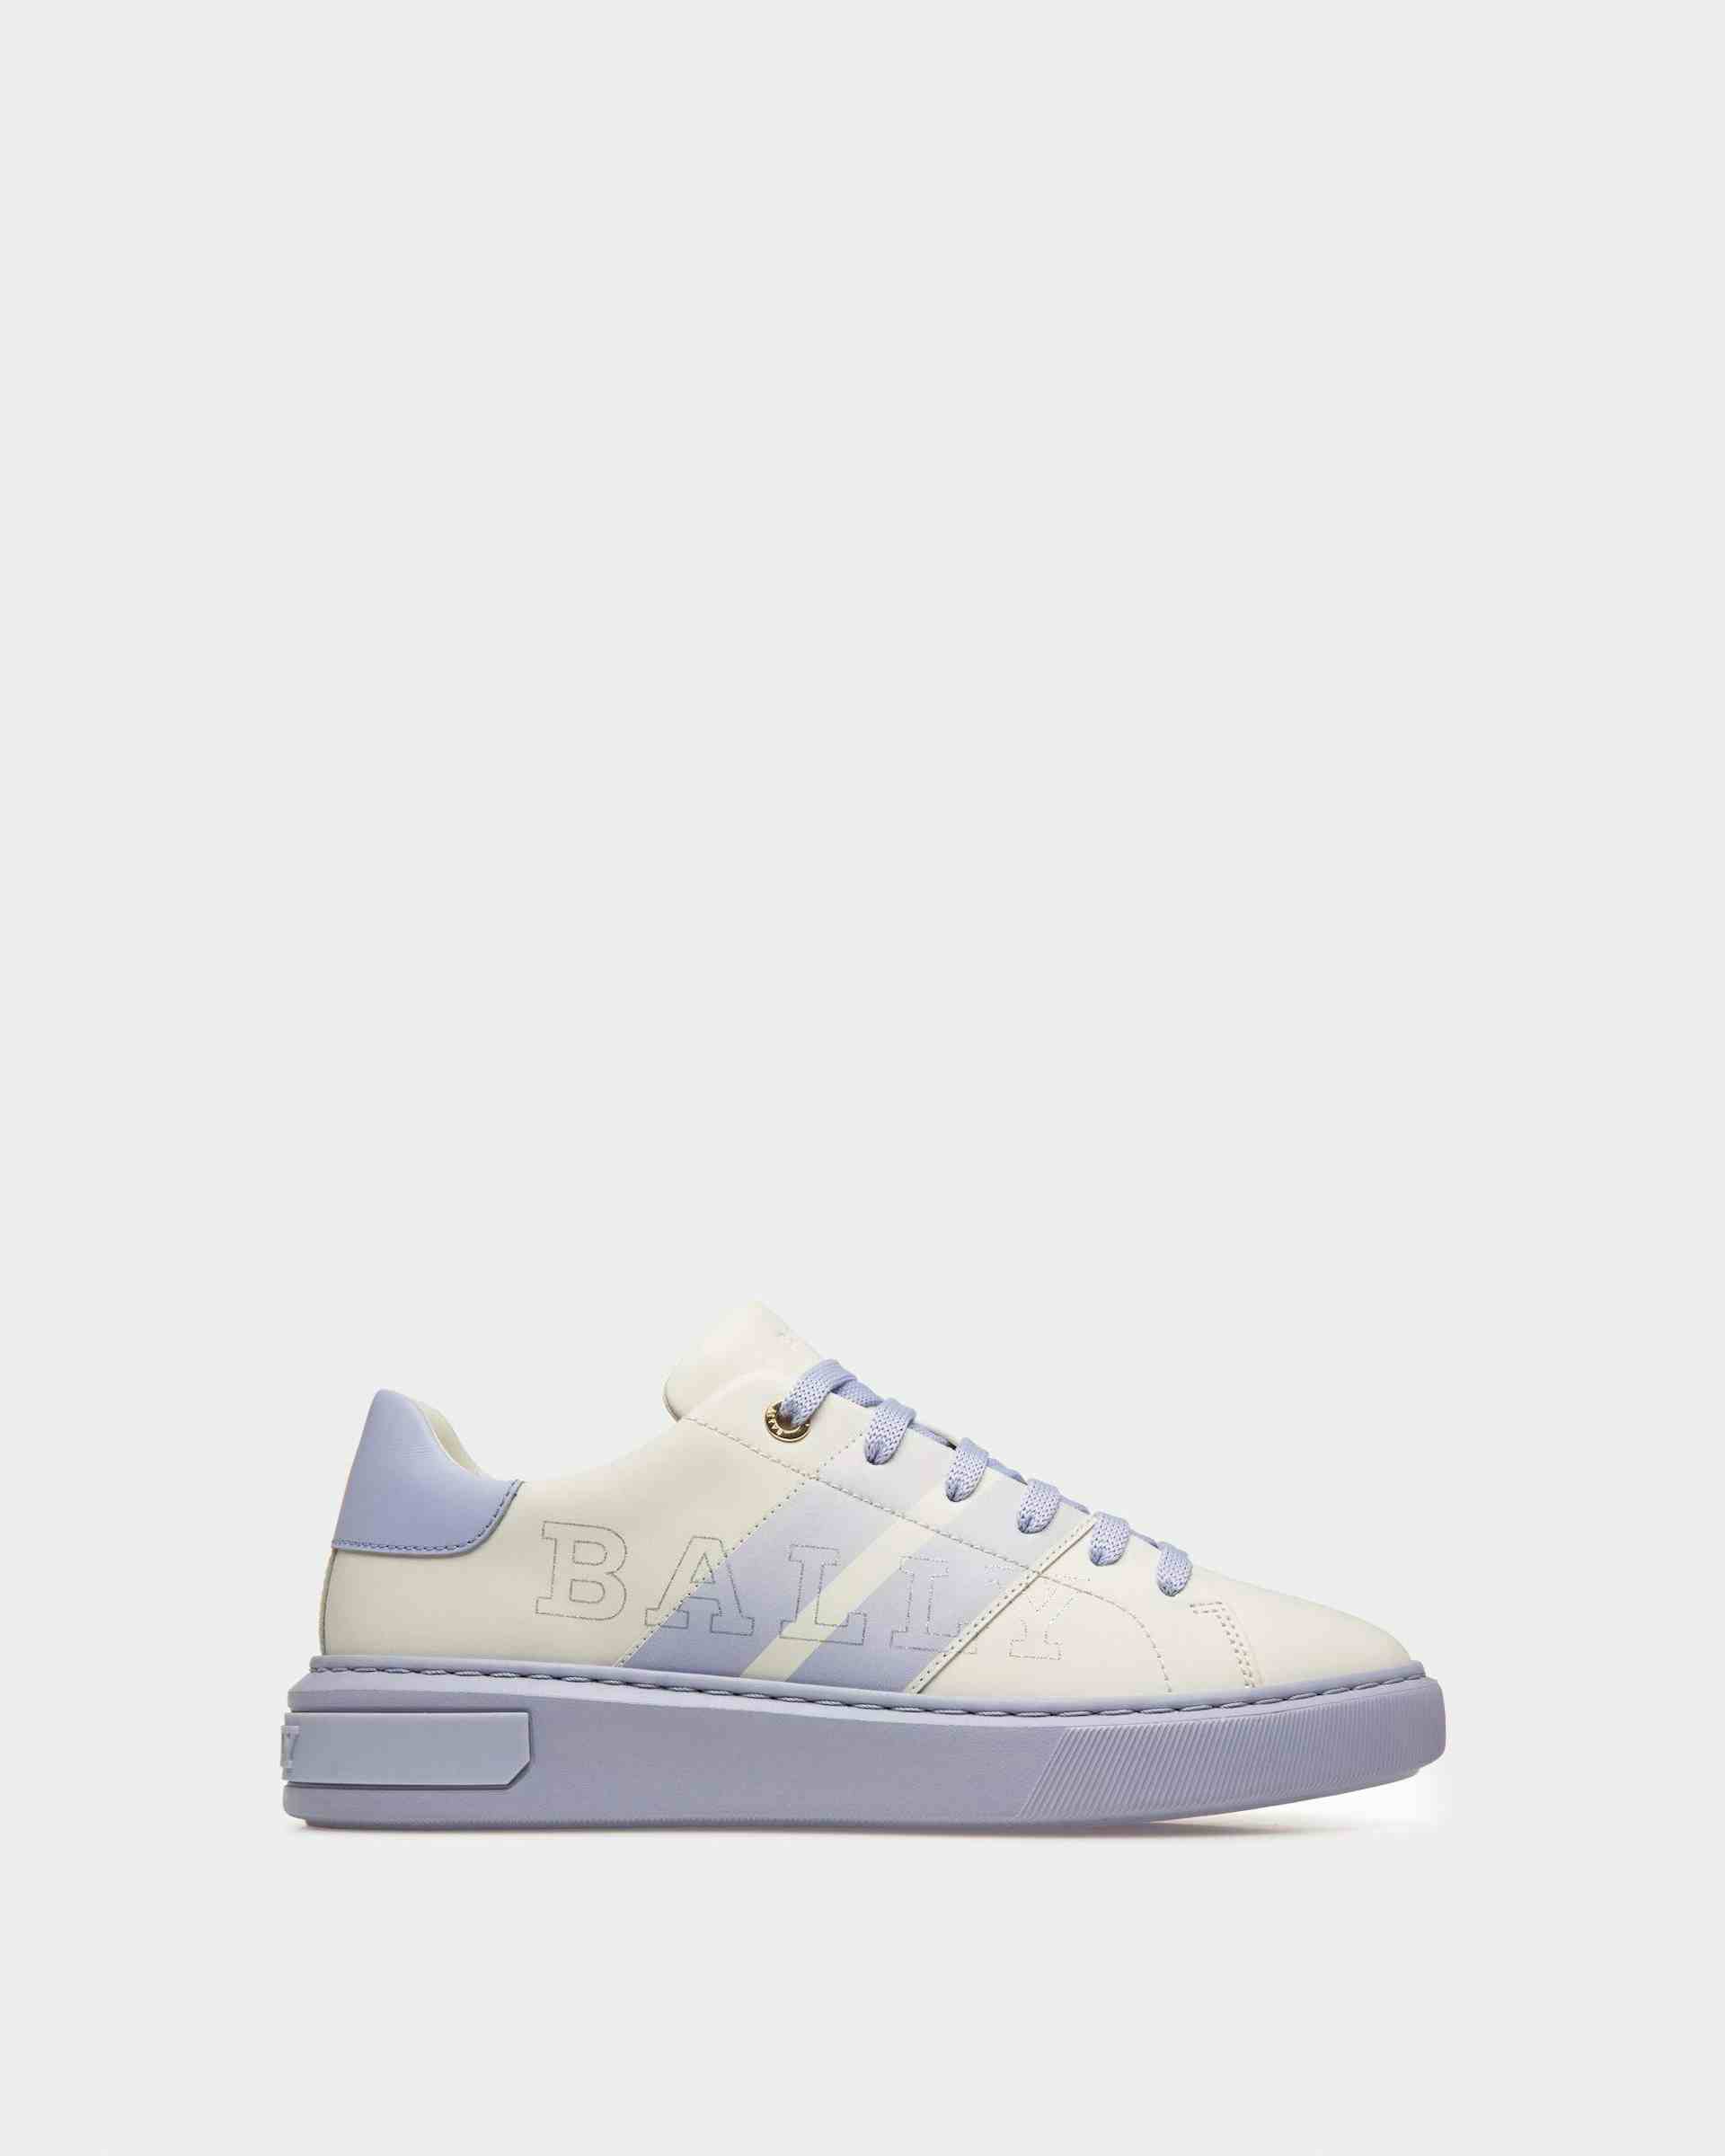 Myra Leather Sneakers In White & Lilac - Women's - Bally